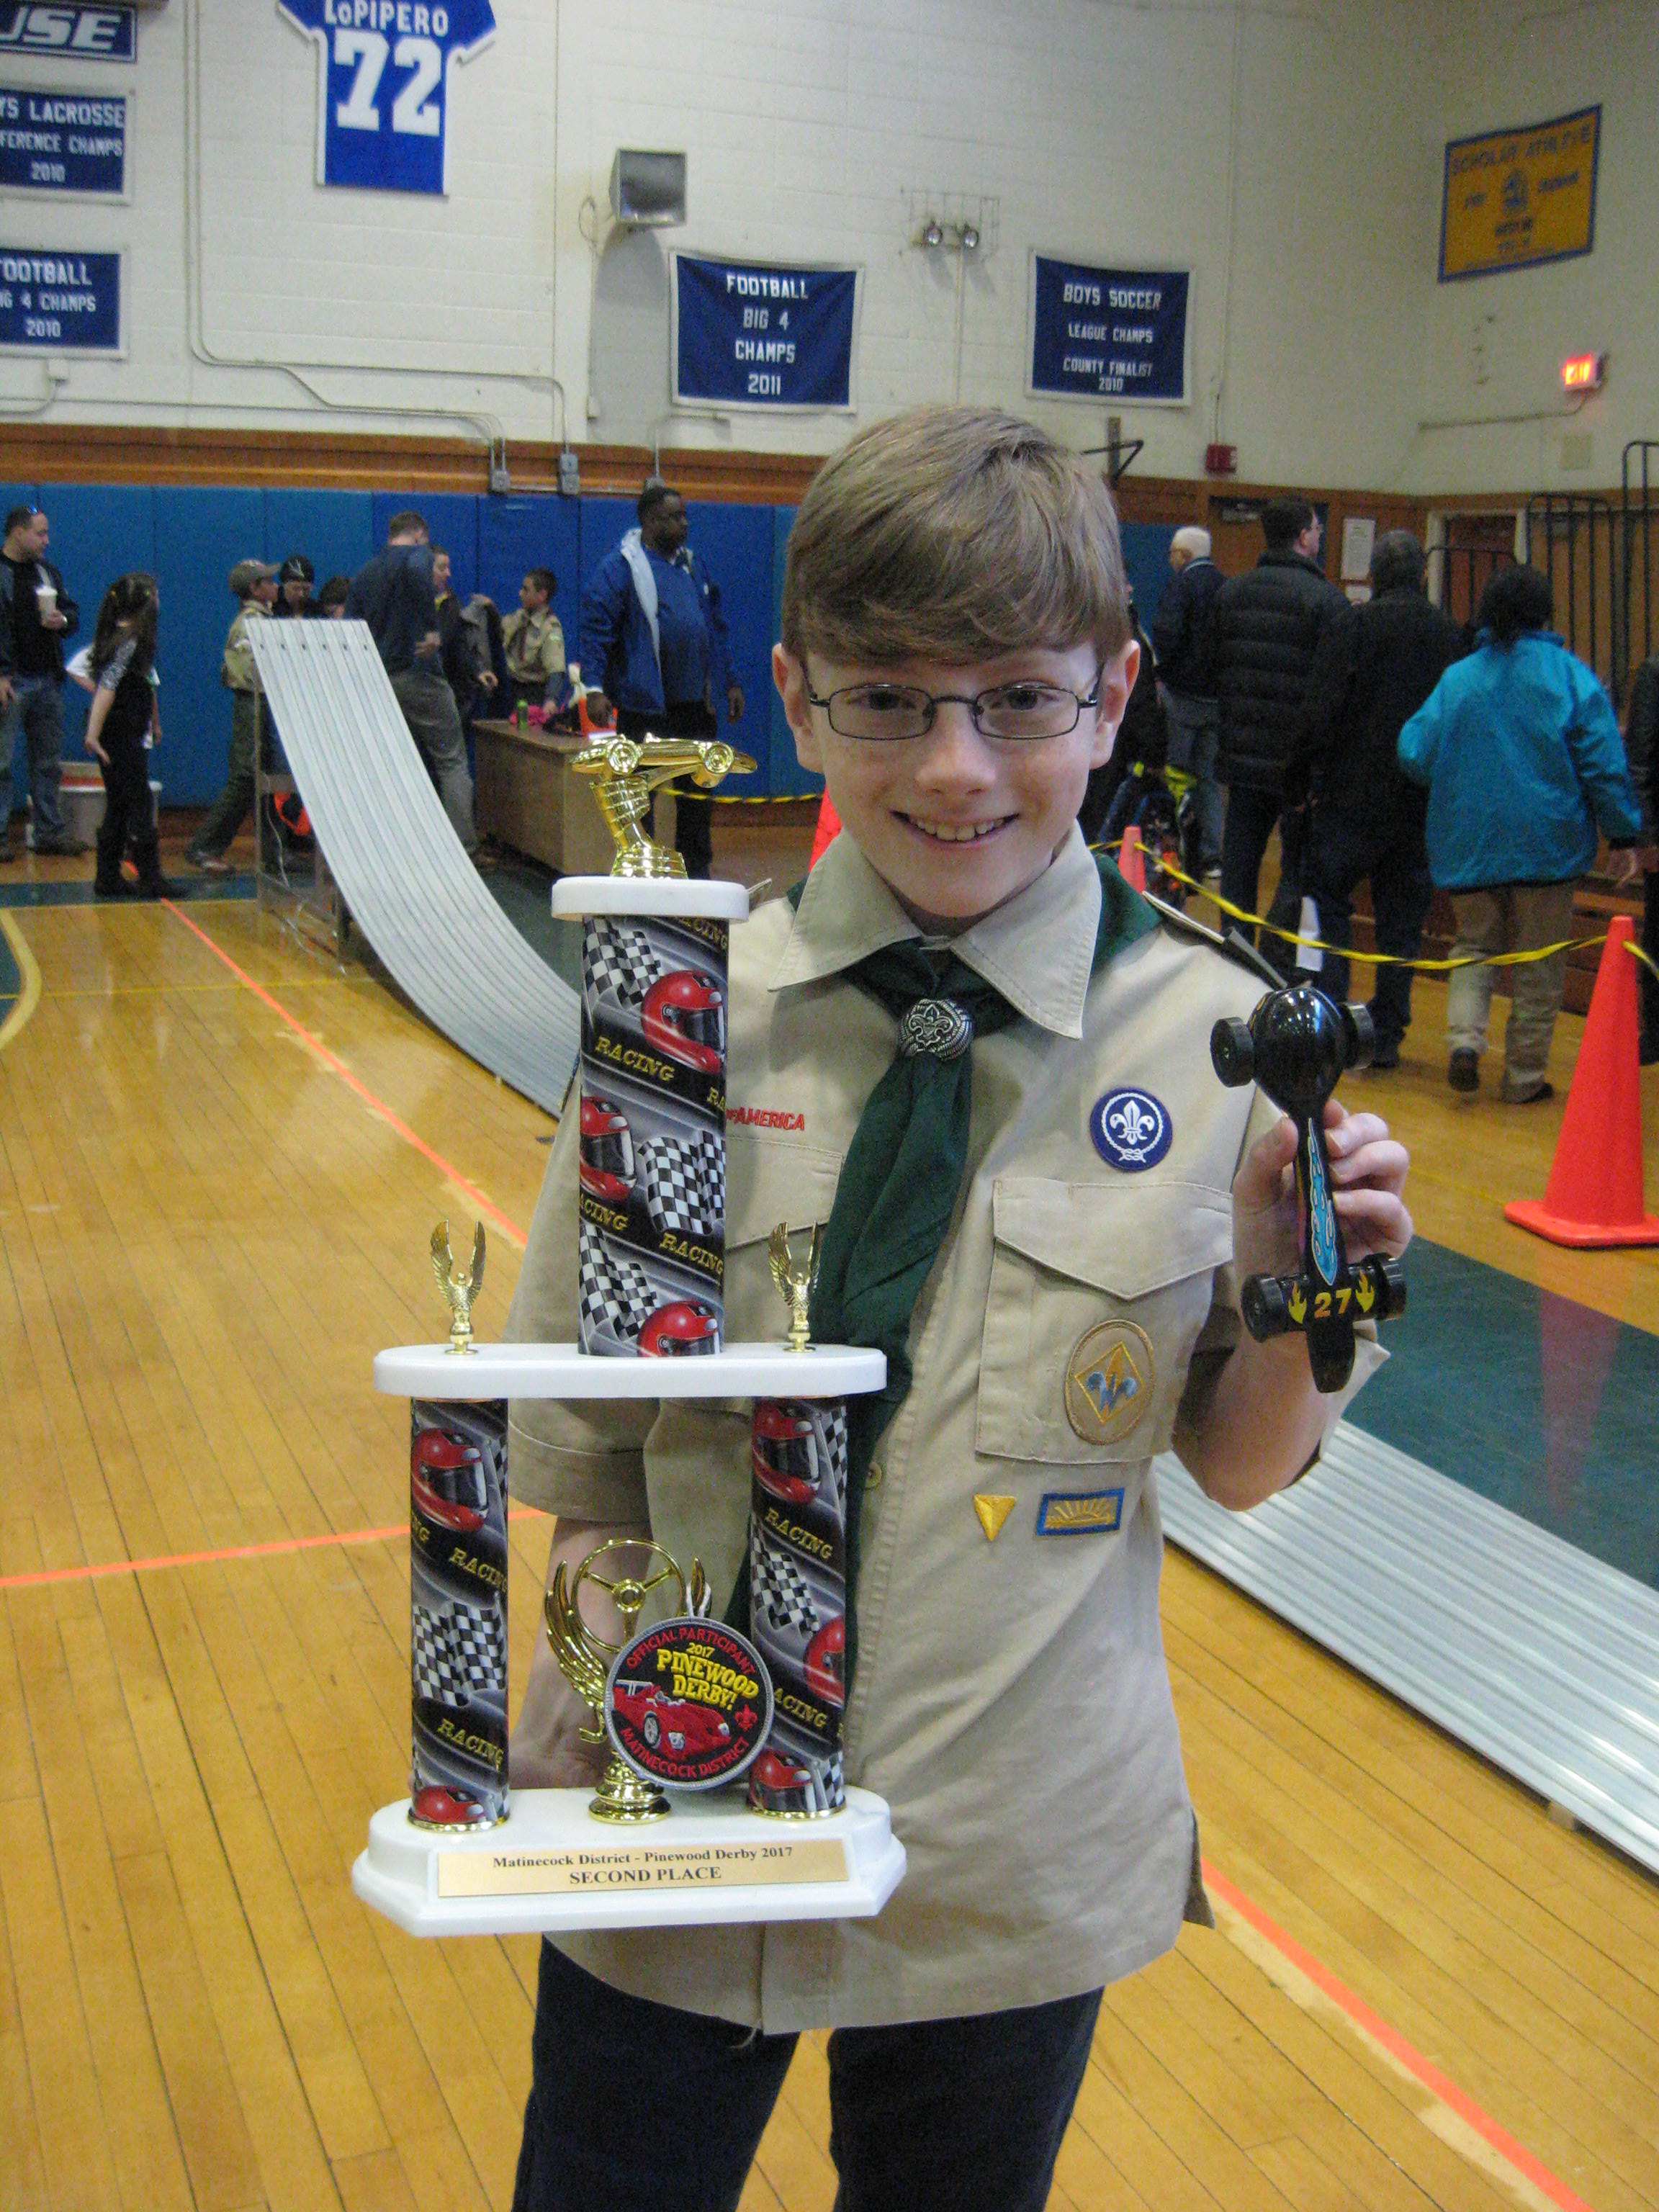  Second Place trophy winner Aidan L., of East Northport’s Pack 52 